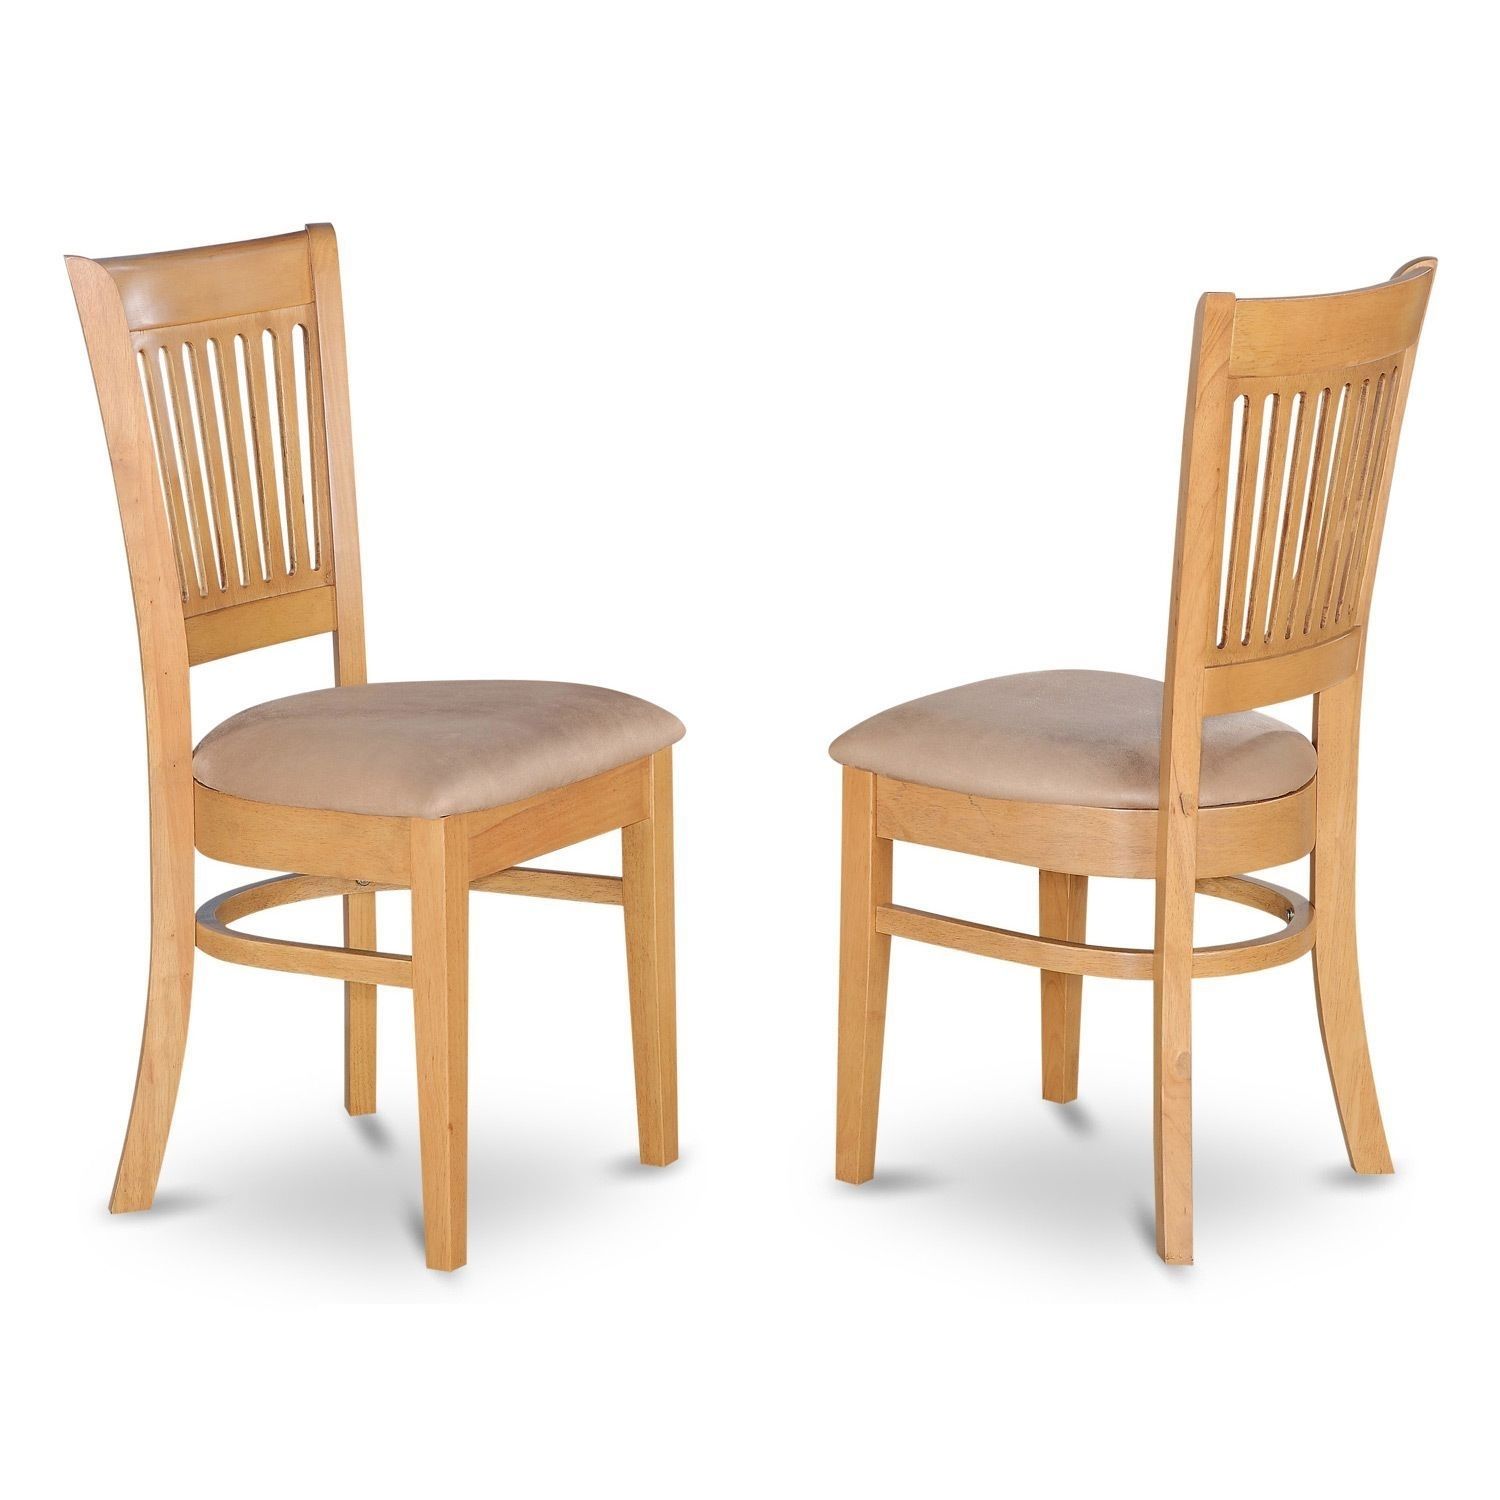 Vancouver Oak Dining Chairs (Set Of 2) (Microfiber), Brown In Most Recent Caden 5 Piece Round Dining Sets With Upholstered Side Chairs (View 19 of 20)